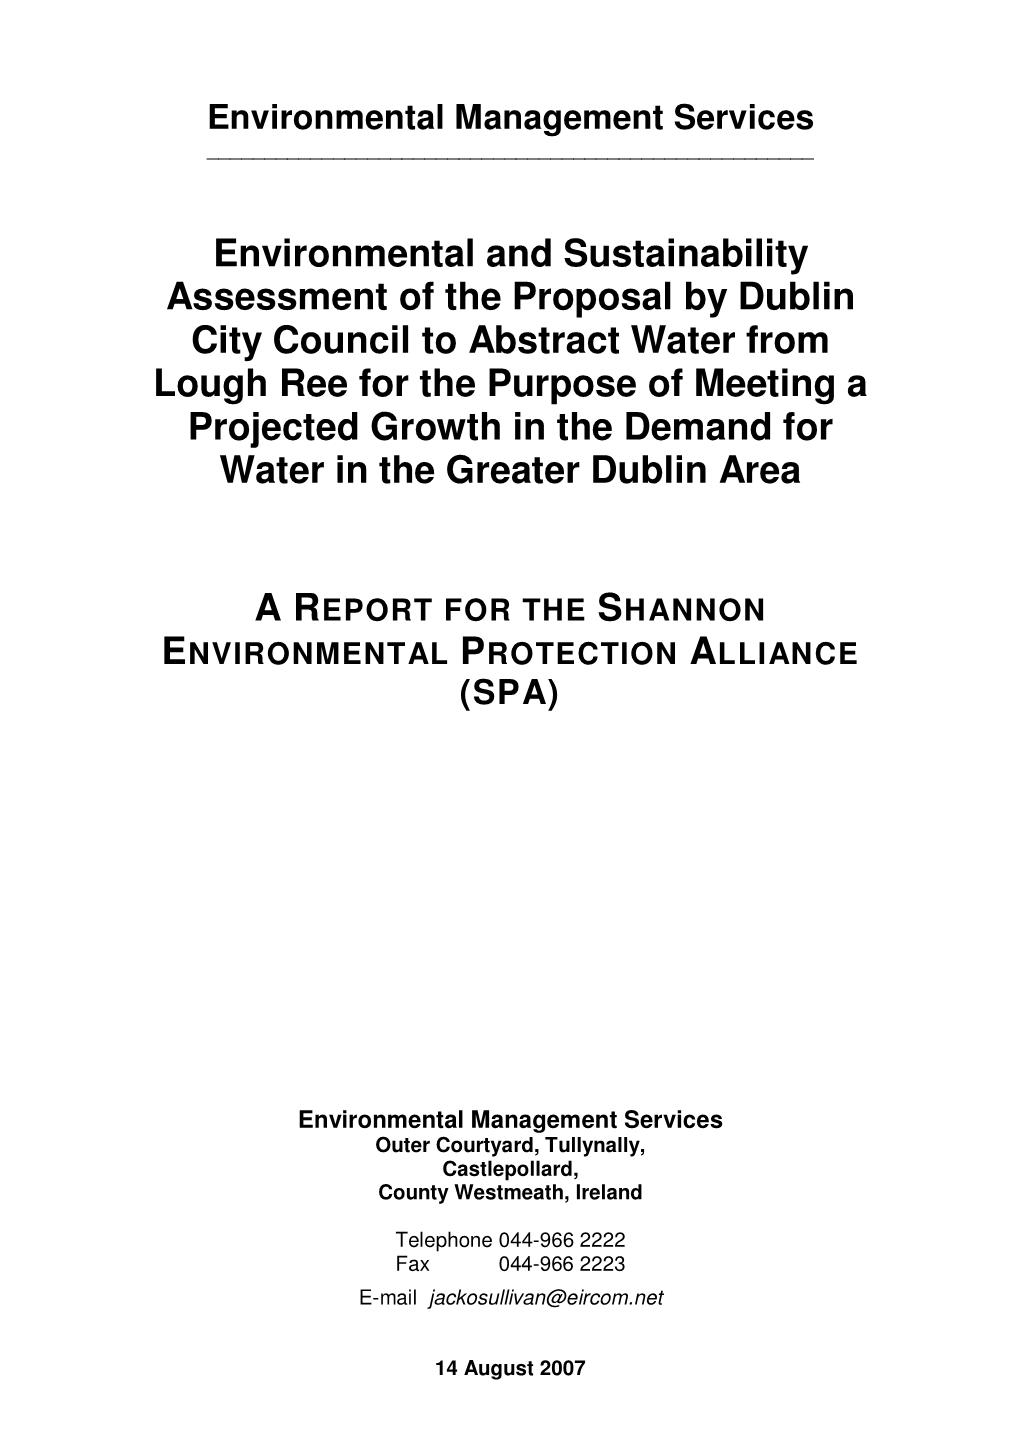 Environmental and Sustainability Assessment of the Proposal by Dublin City Council to Abstract Water from Lough Ree for the Purp